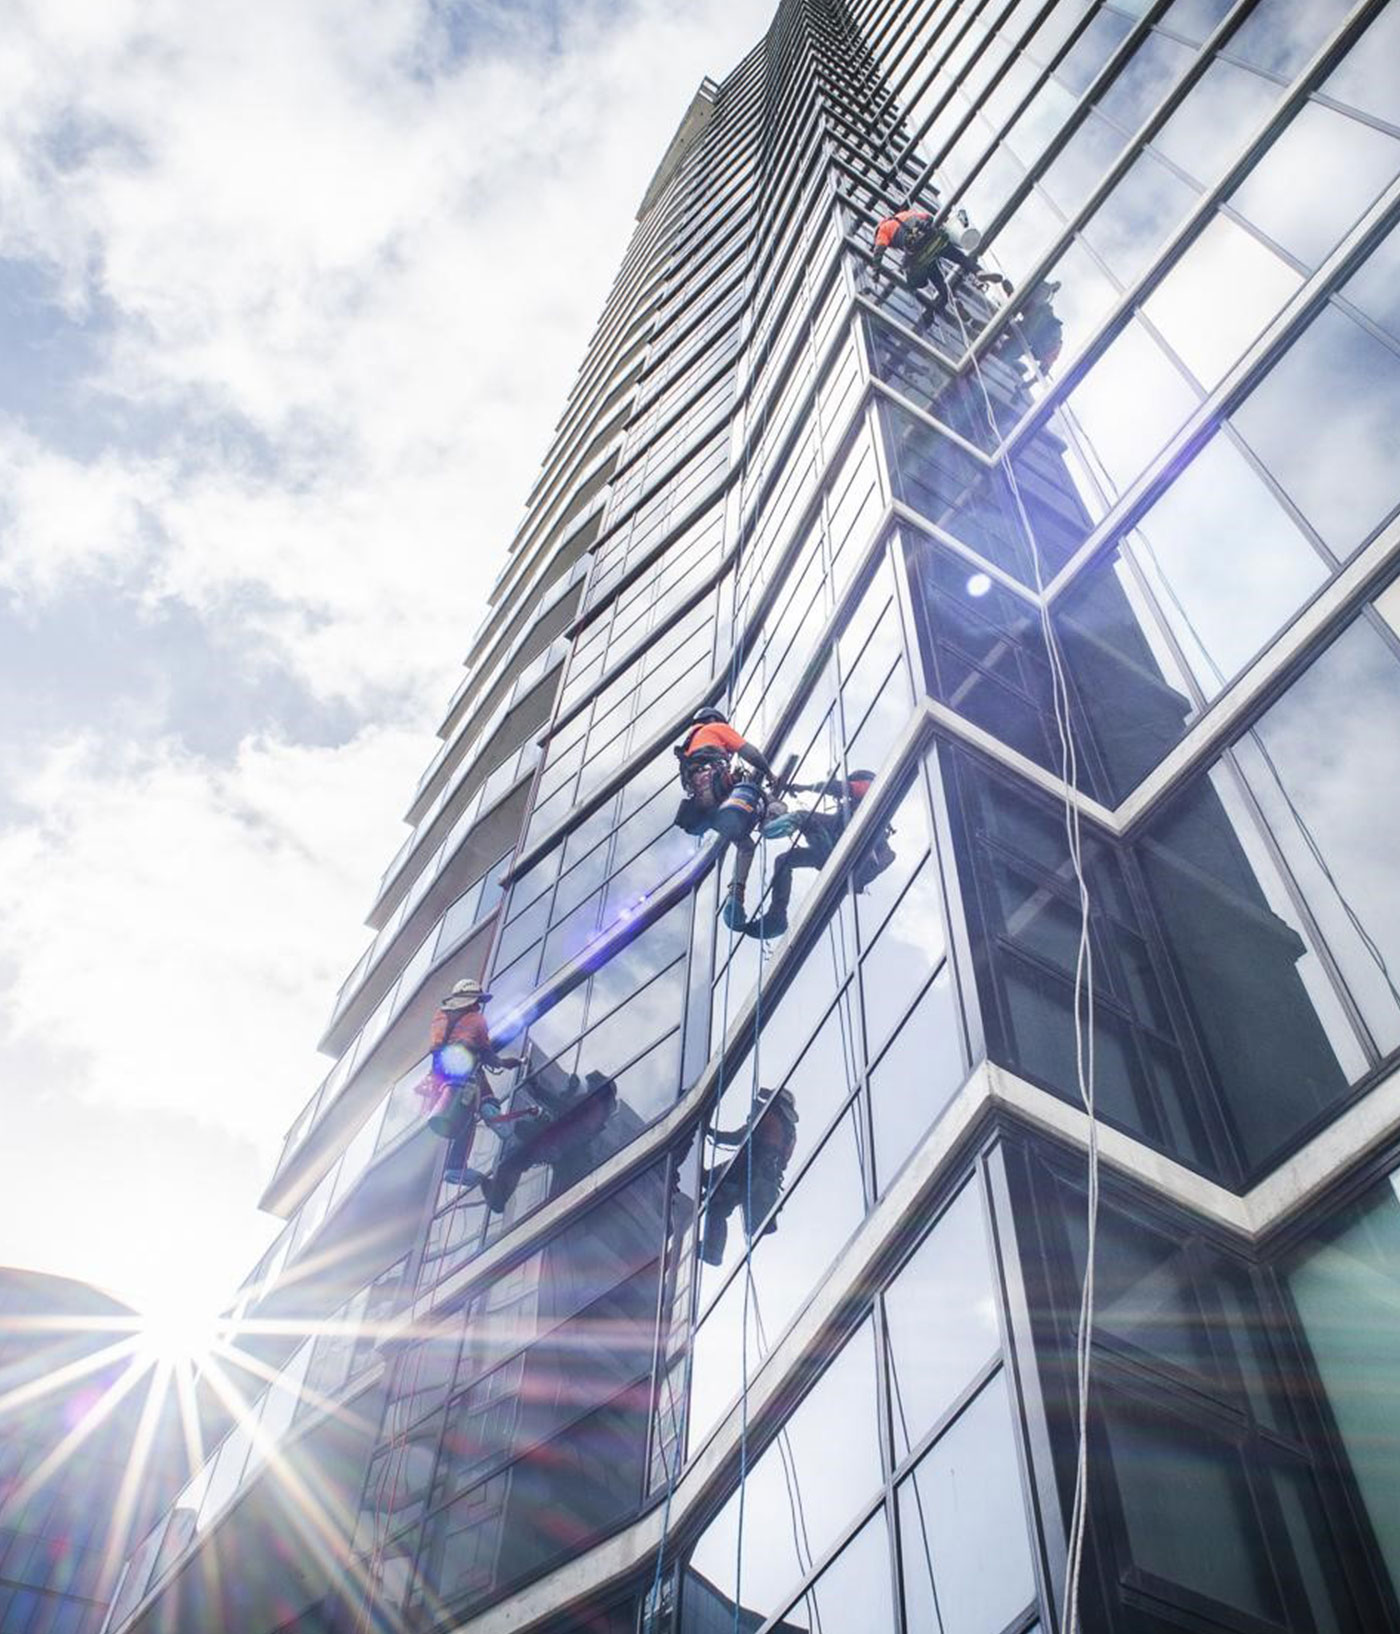 Rope Access Highrise Window Cleaners